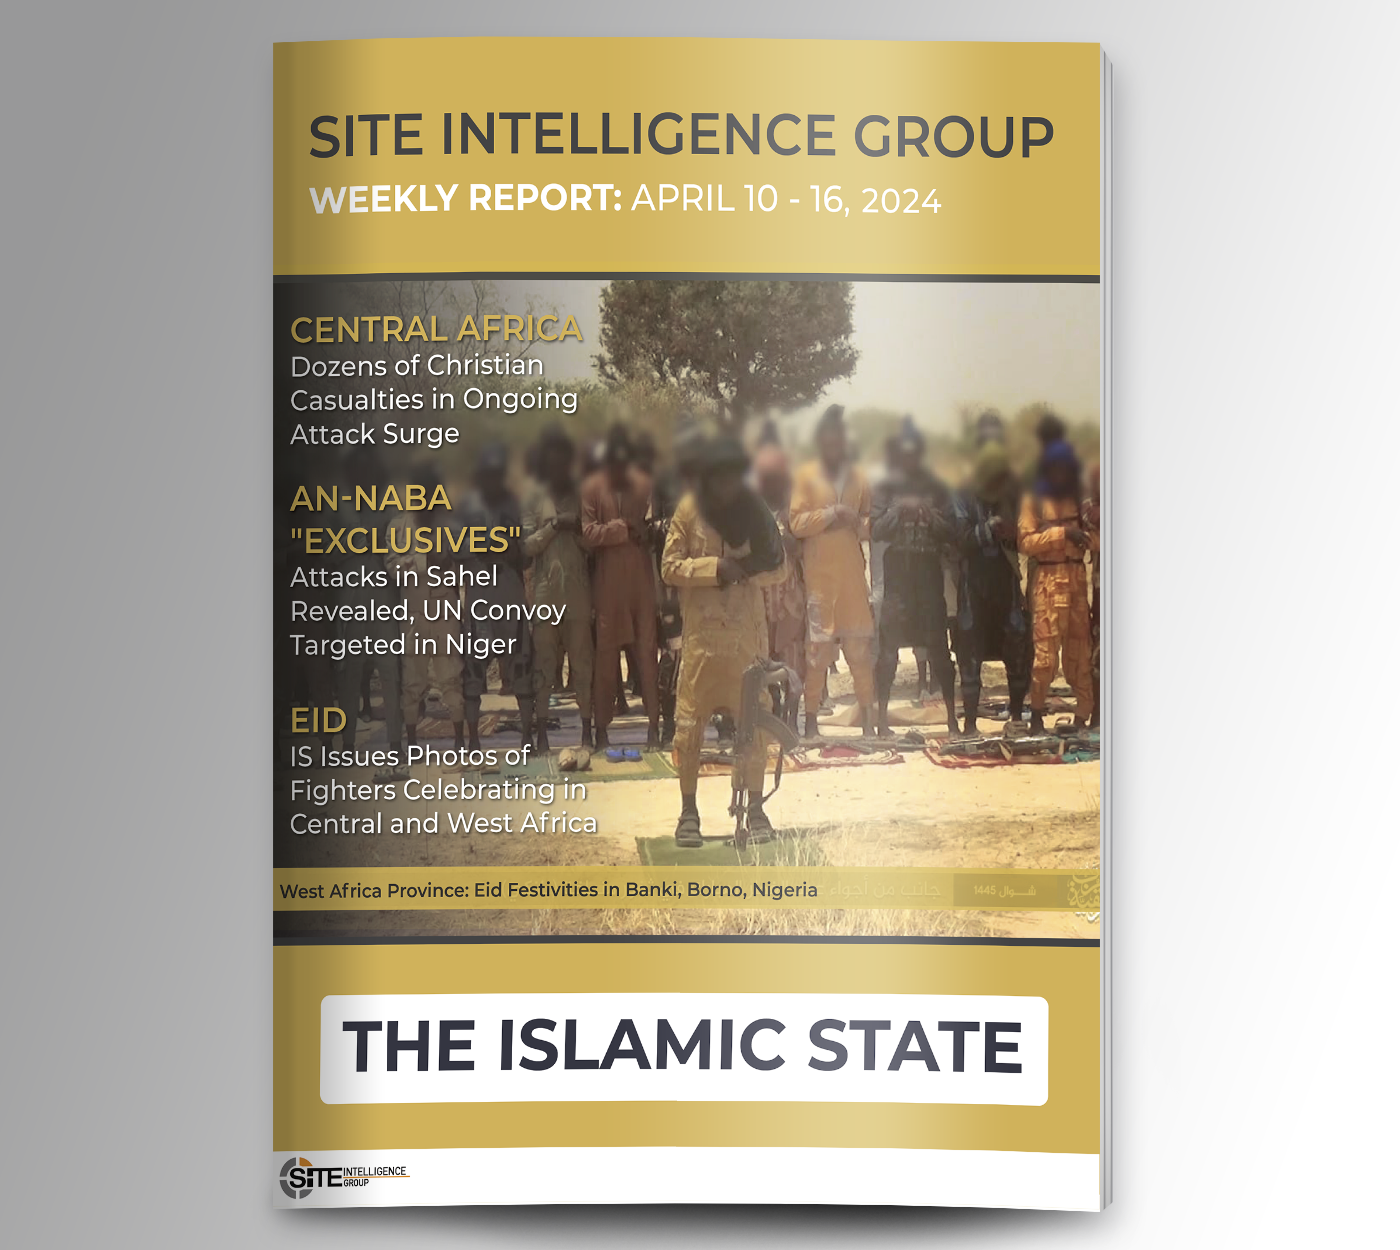 Weekly inSITE on the Islamic State for April 10-16, 2024